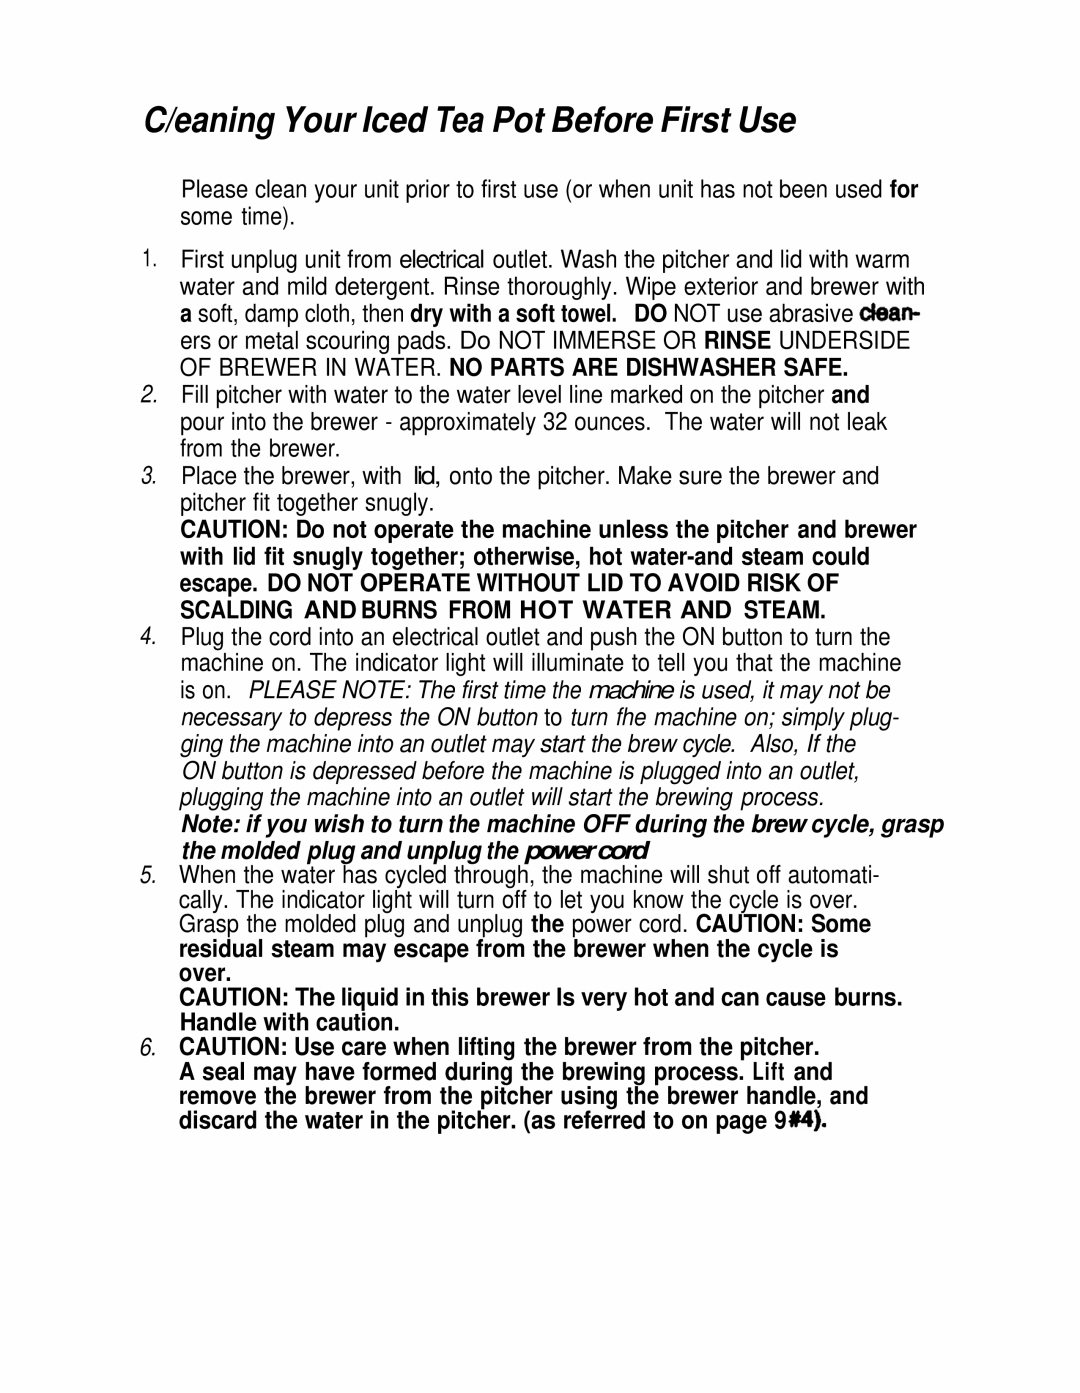 Mr. Coffee TM10, TM5 operating instructions C/eaning Your Iced Tea Pot Before First Use 